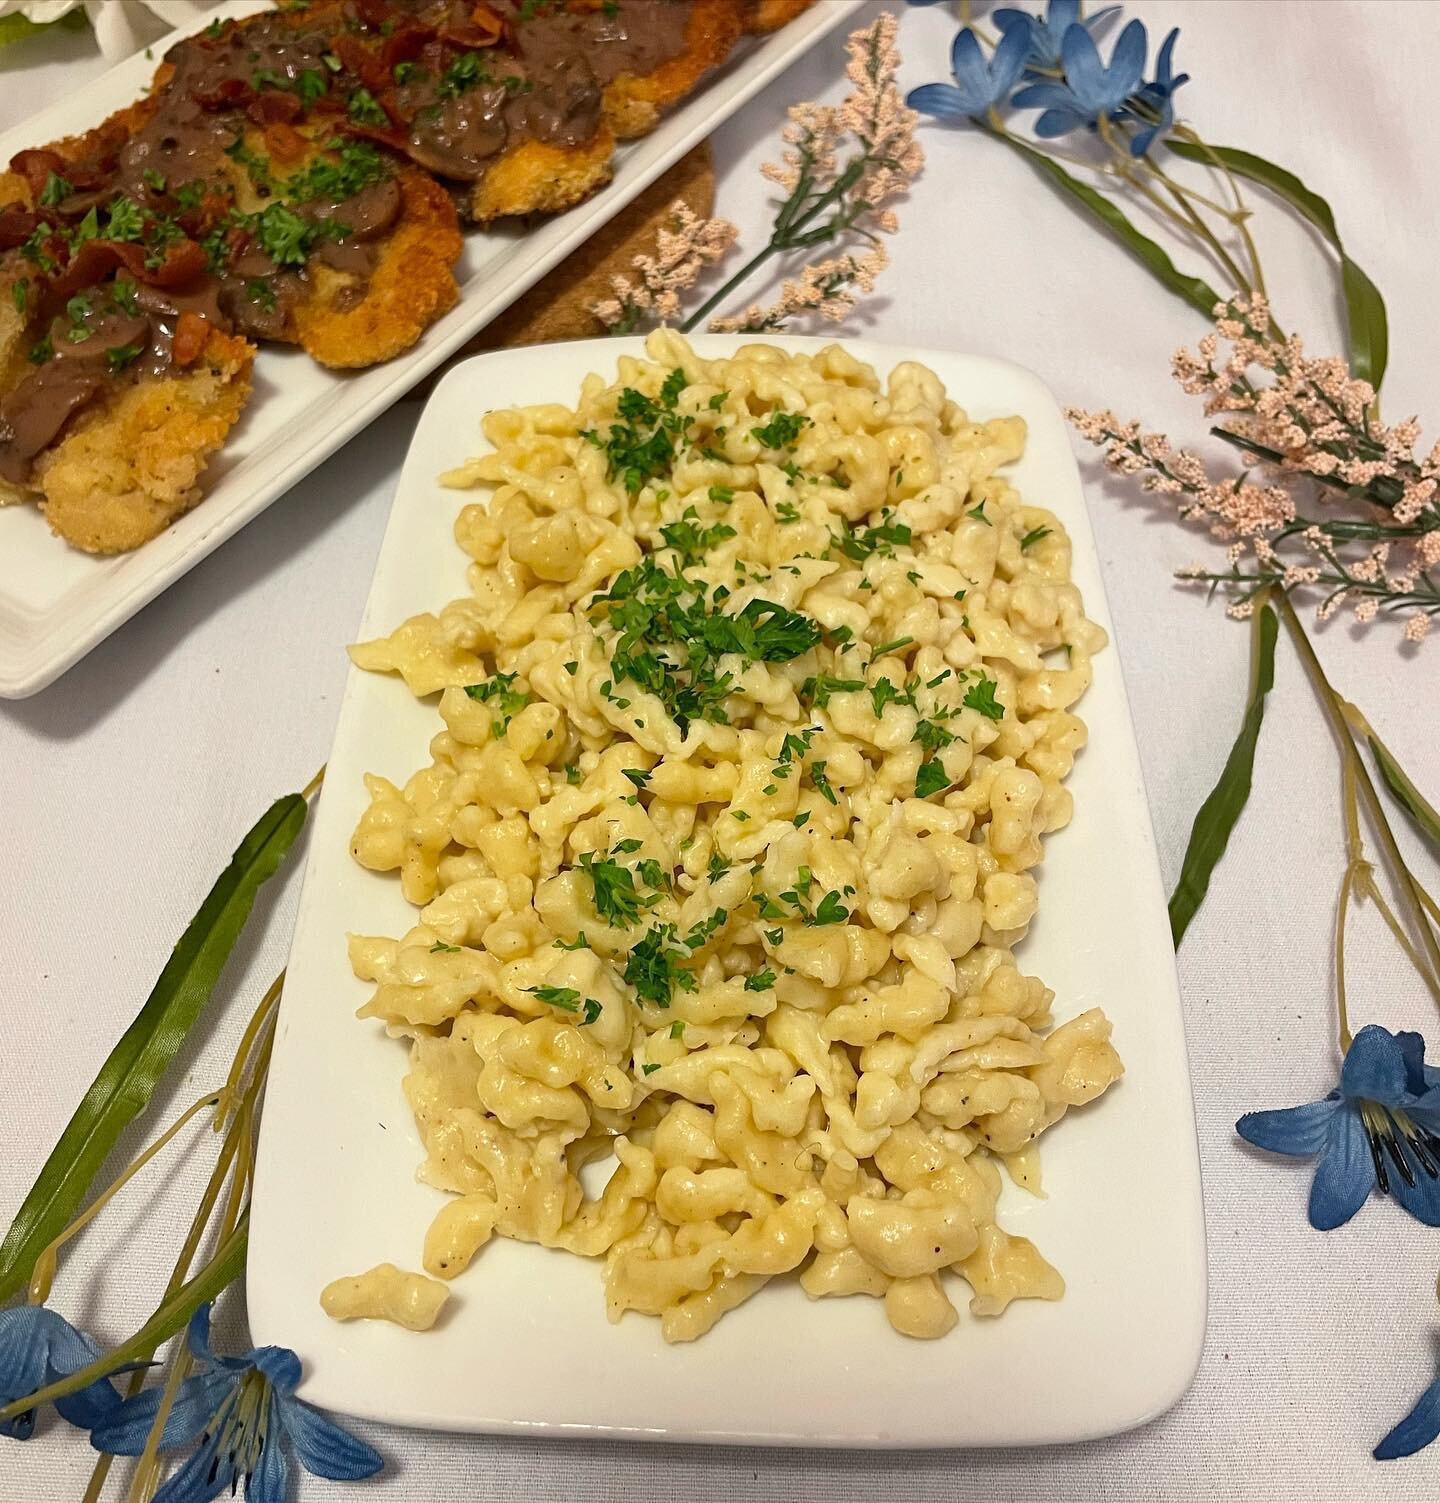 Spaetzle 

These tiny German egg noodles are quick to mix up and delicious!

- 1 cup flour 
- 2 eggs 
- 1/2 tsp salt 
- pinch of nutmeg 
- 1/4 cup water

1. In a bowl add in flour, make a well in the center and add in eggs, salt and nutmeg. 
2. Stir 